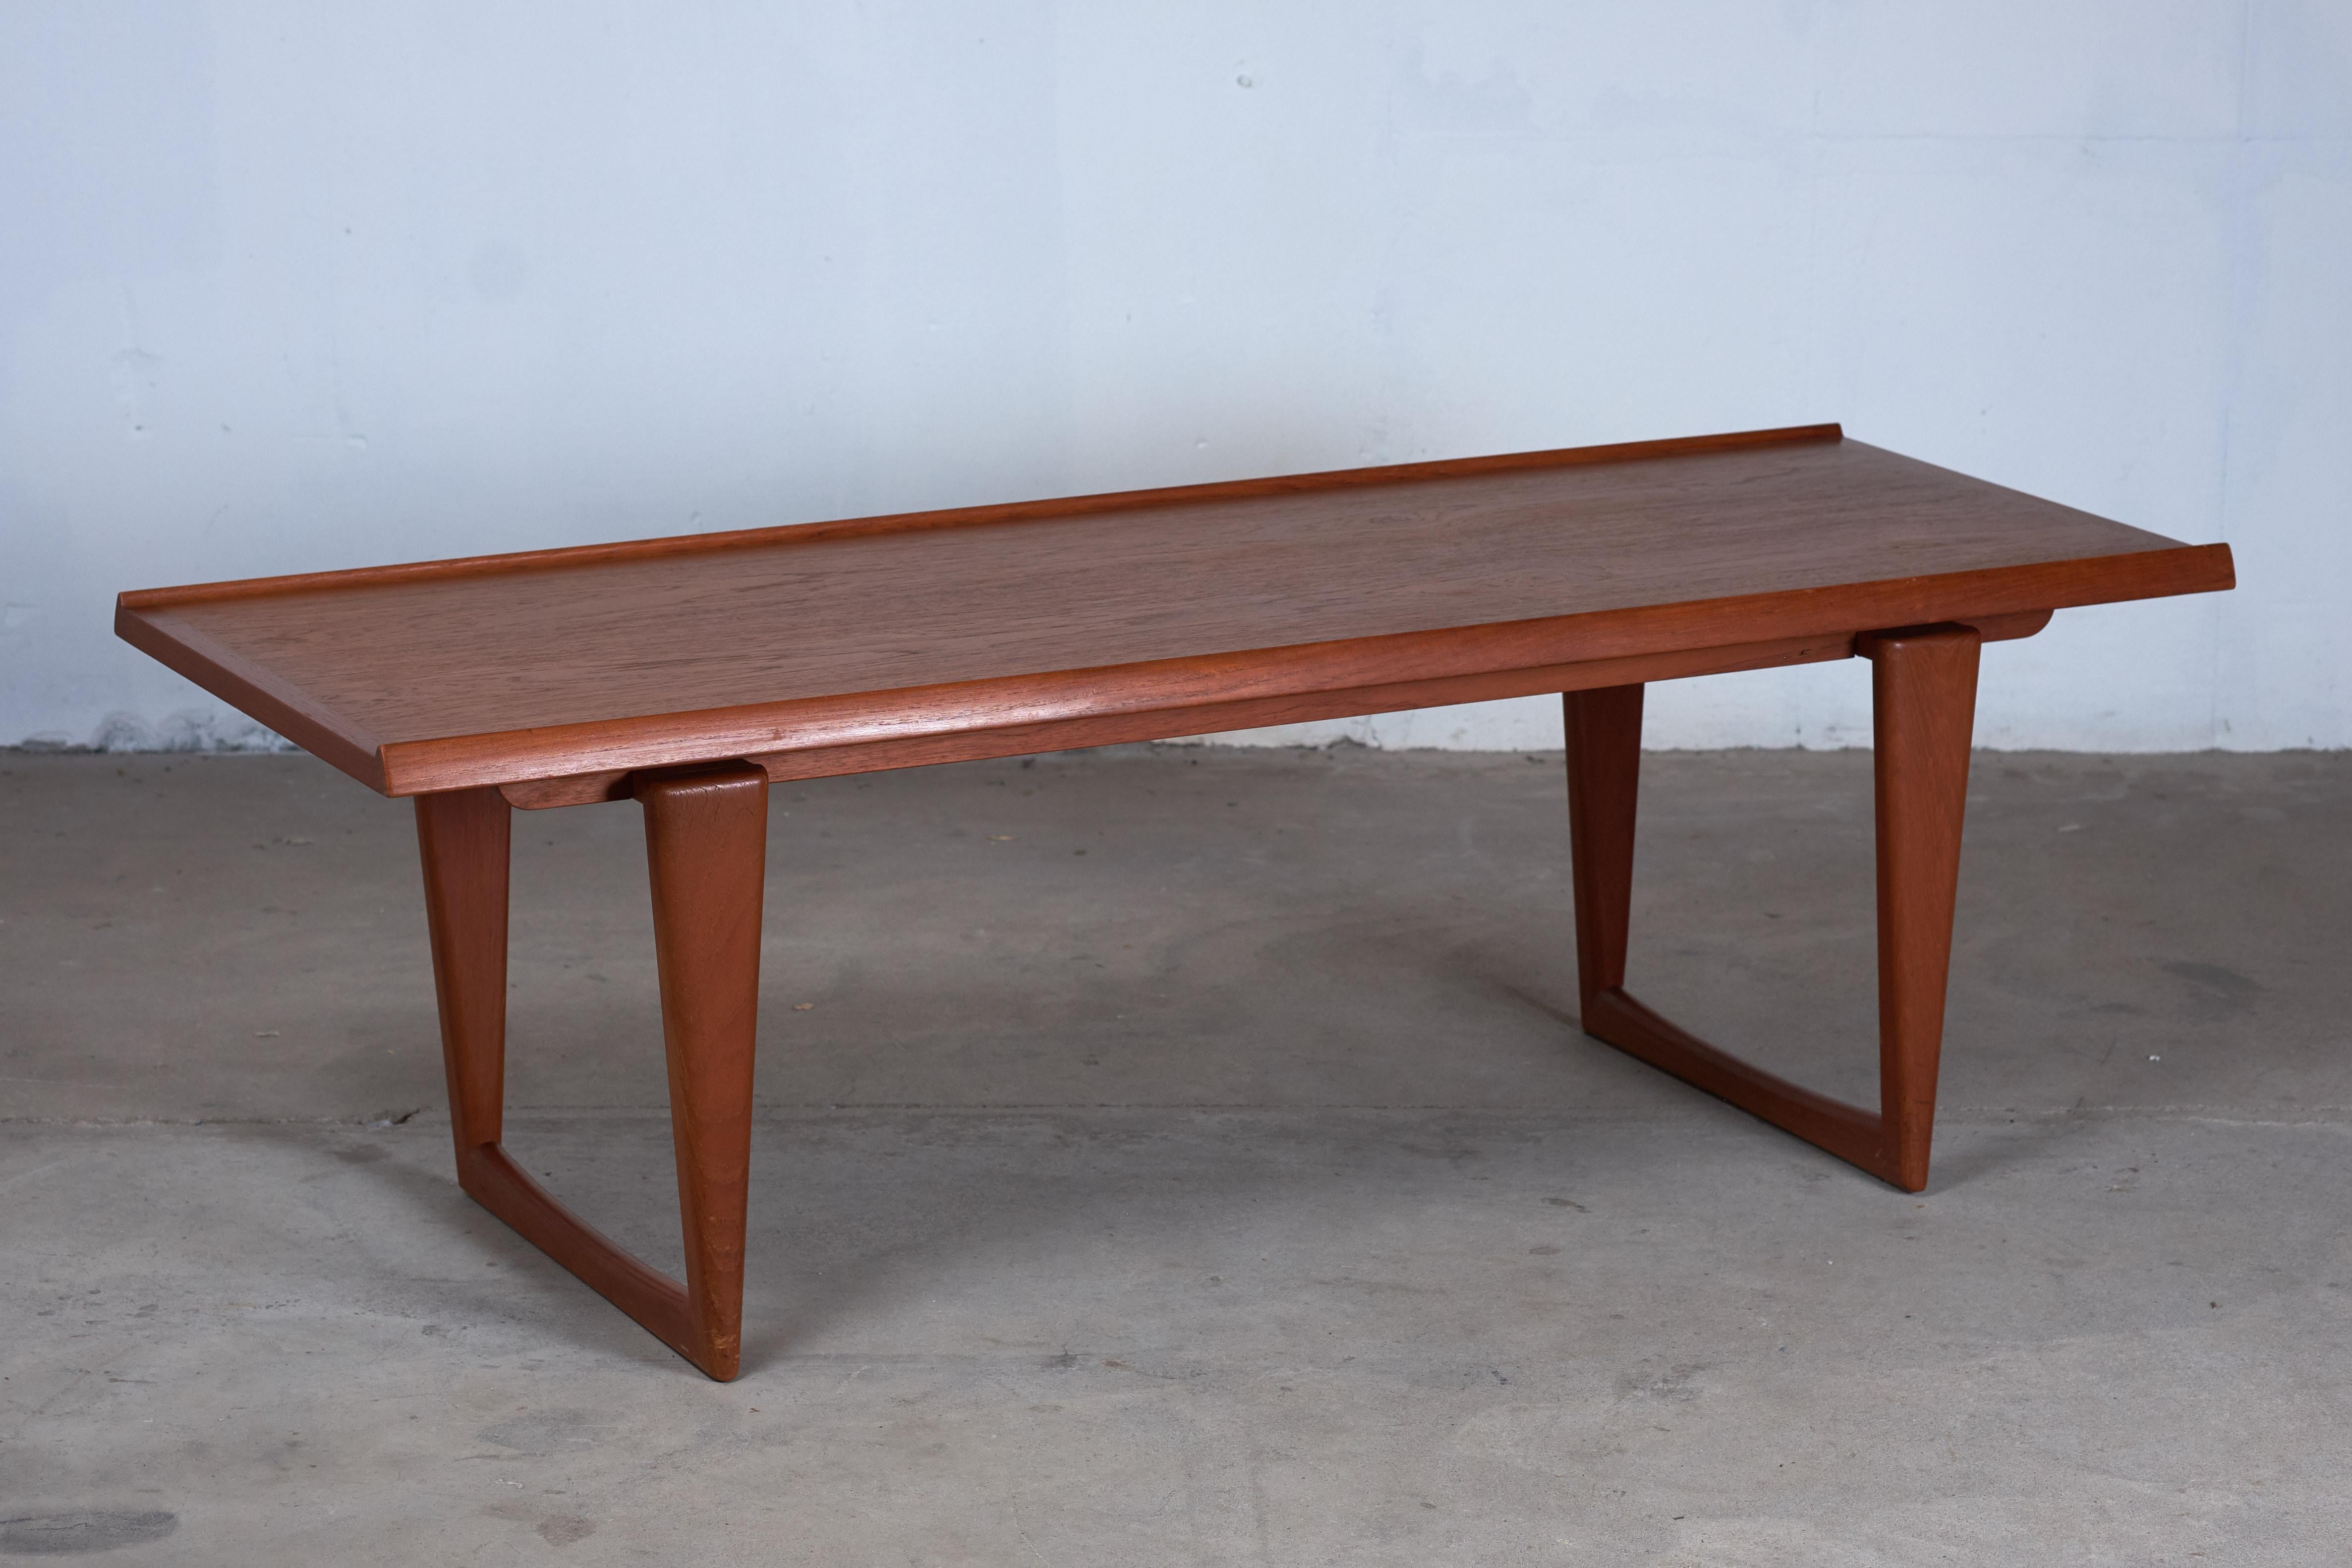 Lovely coffee table in teak, produced in Denmark, circa 1960s.
Features, a raised edge on both sides and is in a very good vintage condition.
The table would suit virtually any modern living environment.